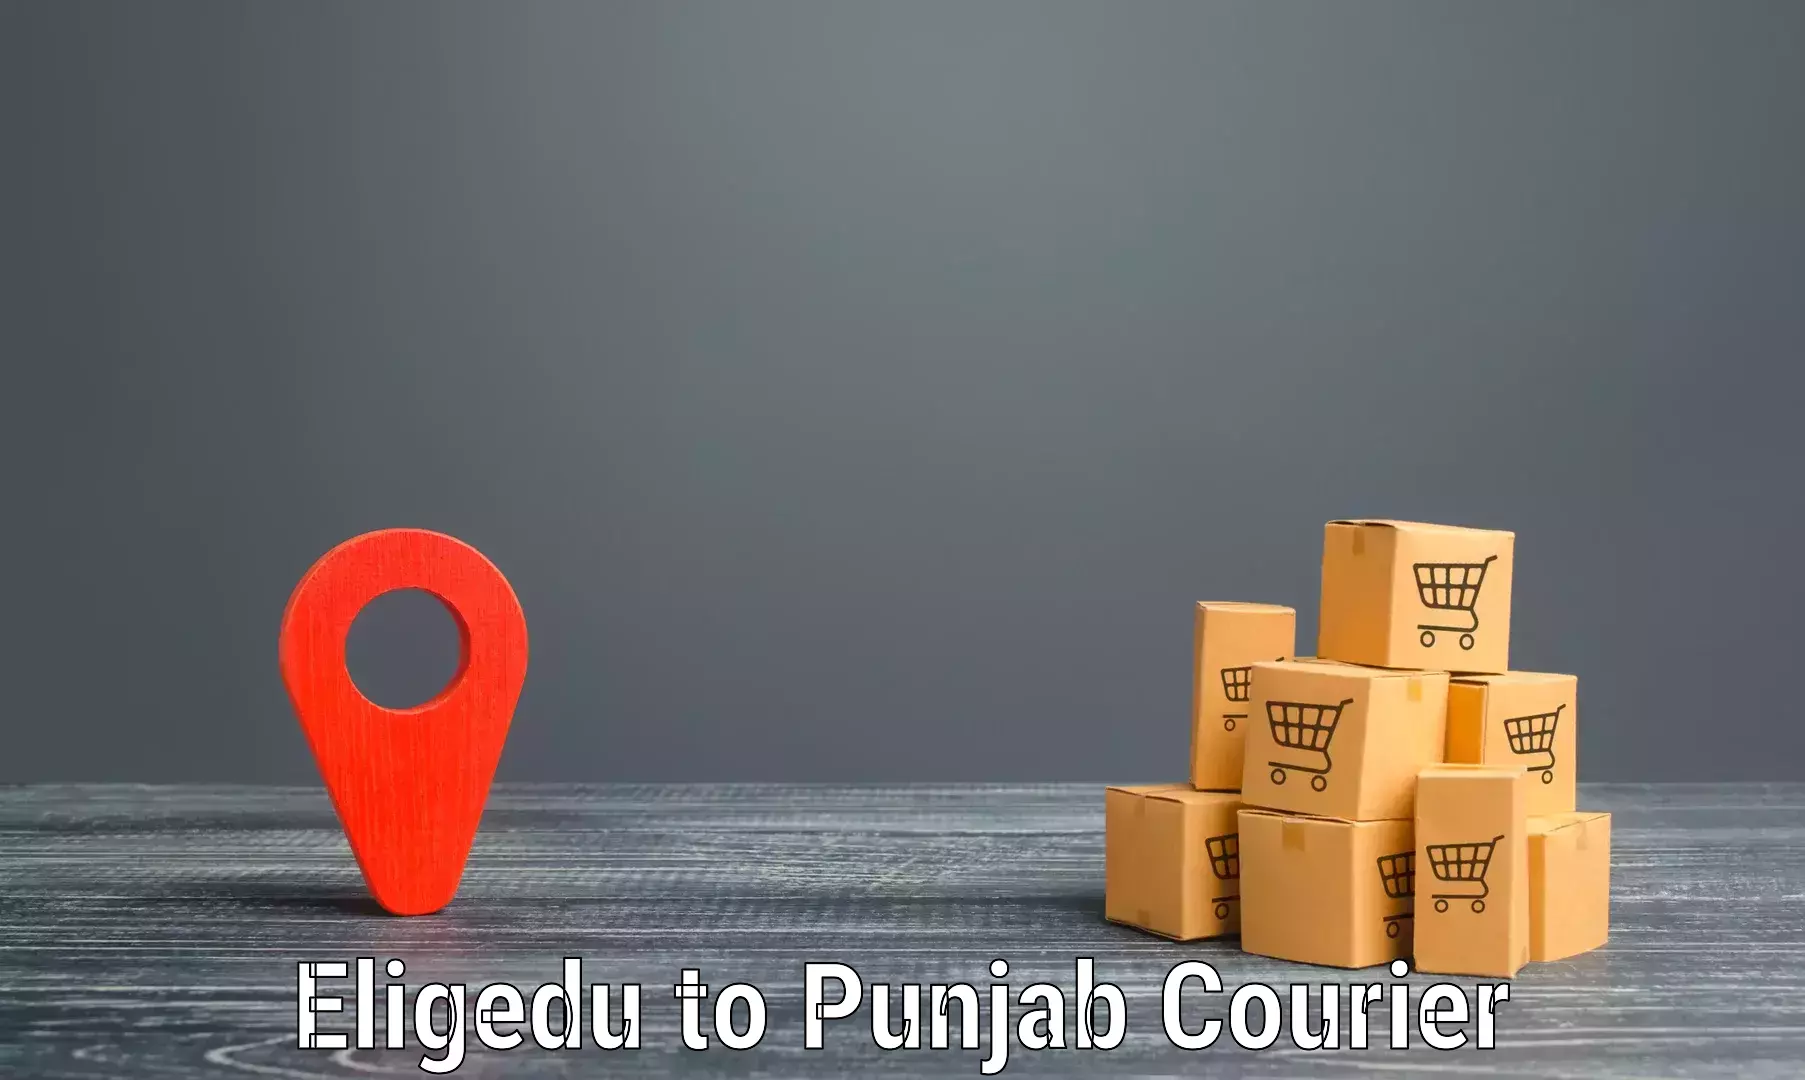 On-call courier service Eligedu to Nawanshahr